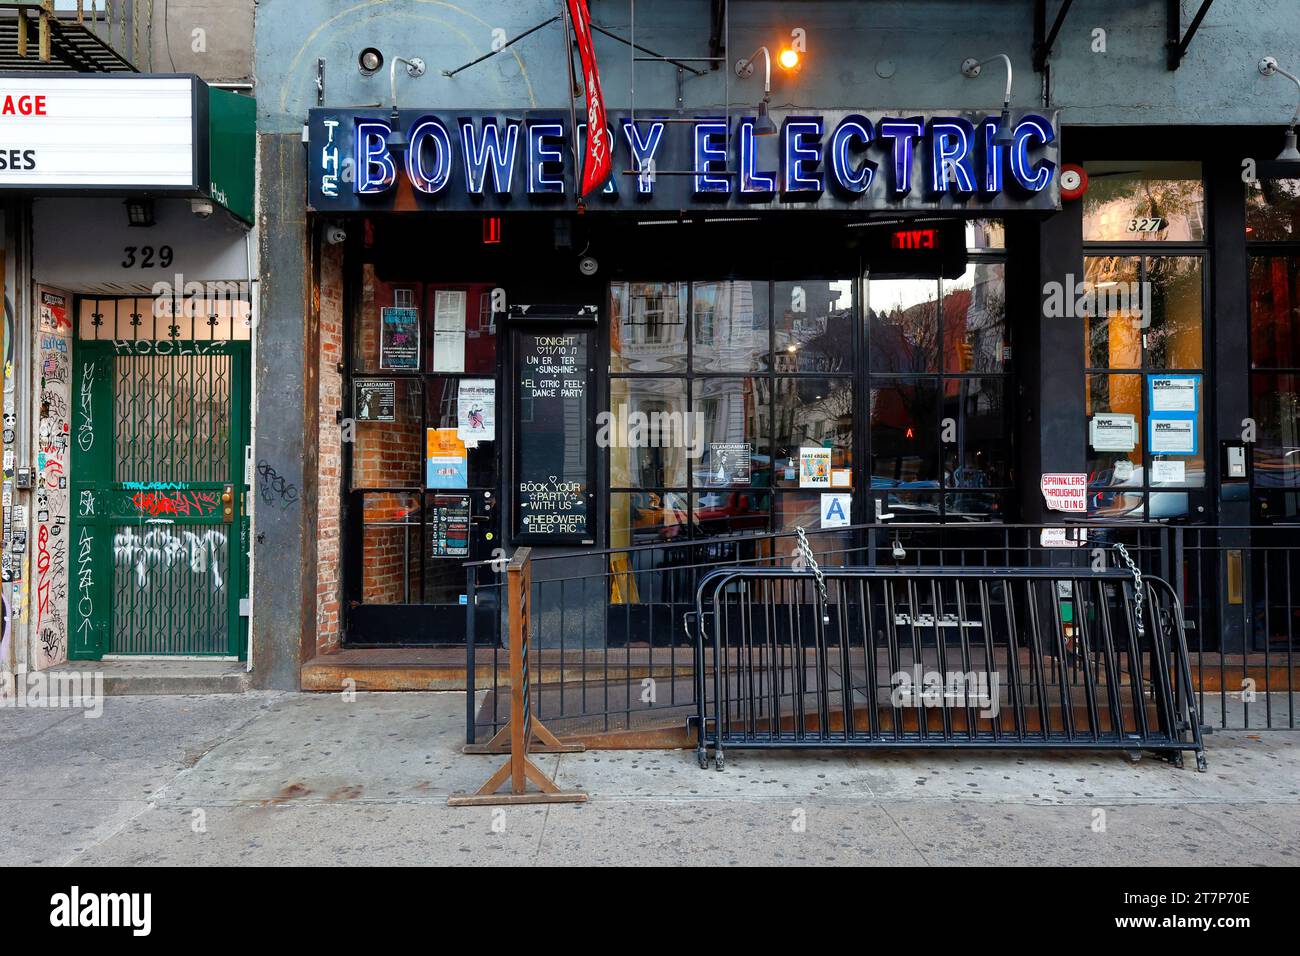 The Bowery Electric, 327 Bowery, New York, NYC, Ladenfront eines Nachtclubs in Manhattans Stadtteil NoHo. Stockfoto